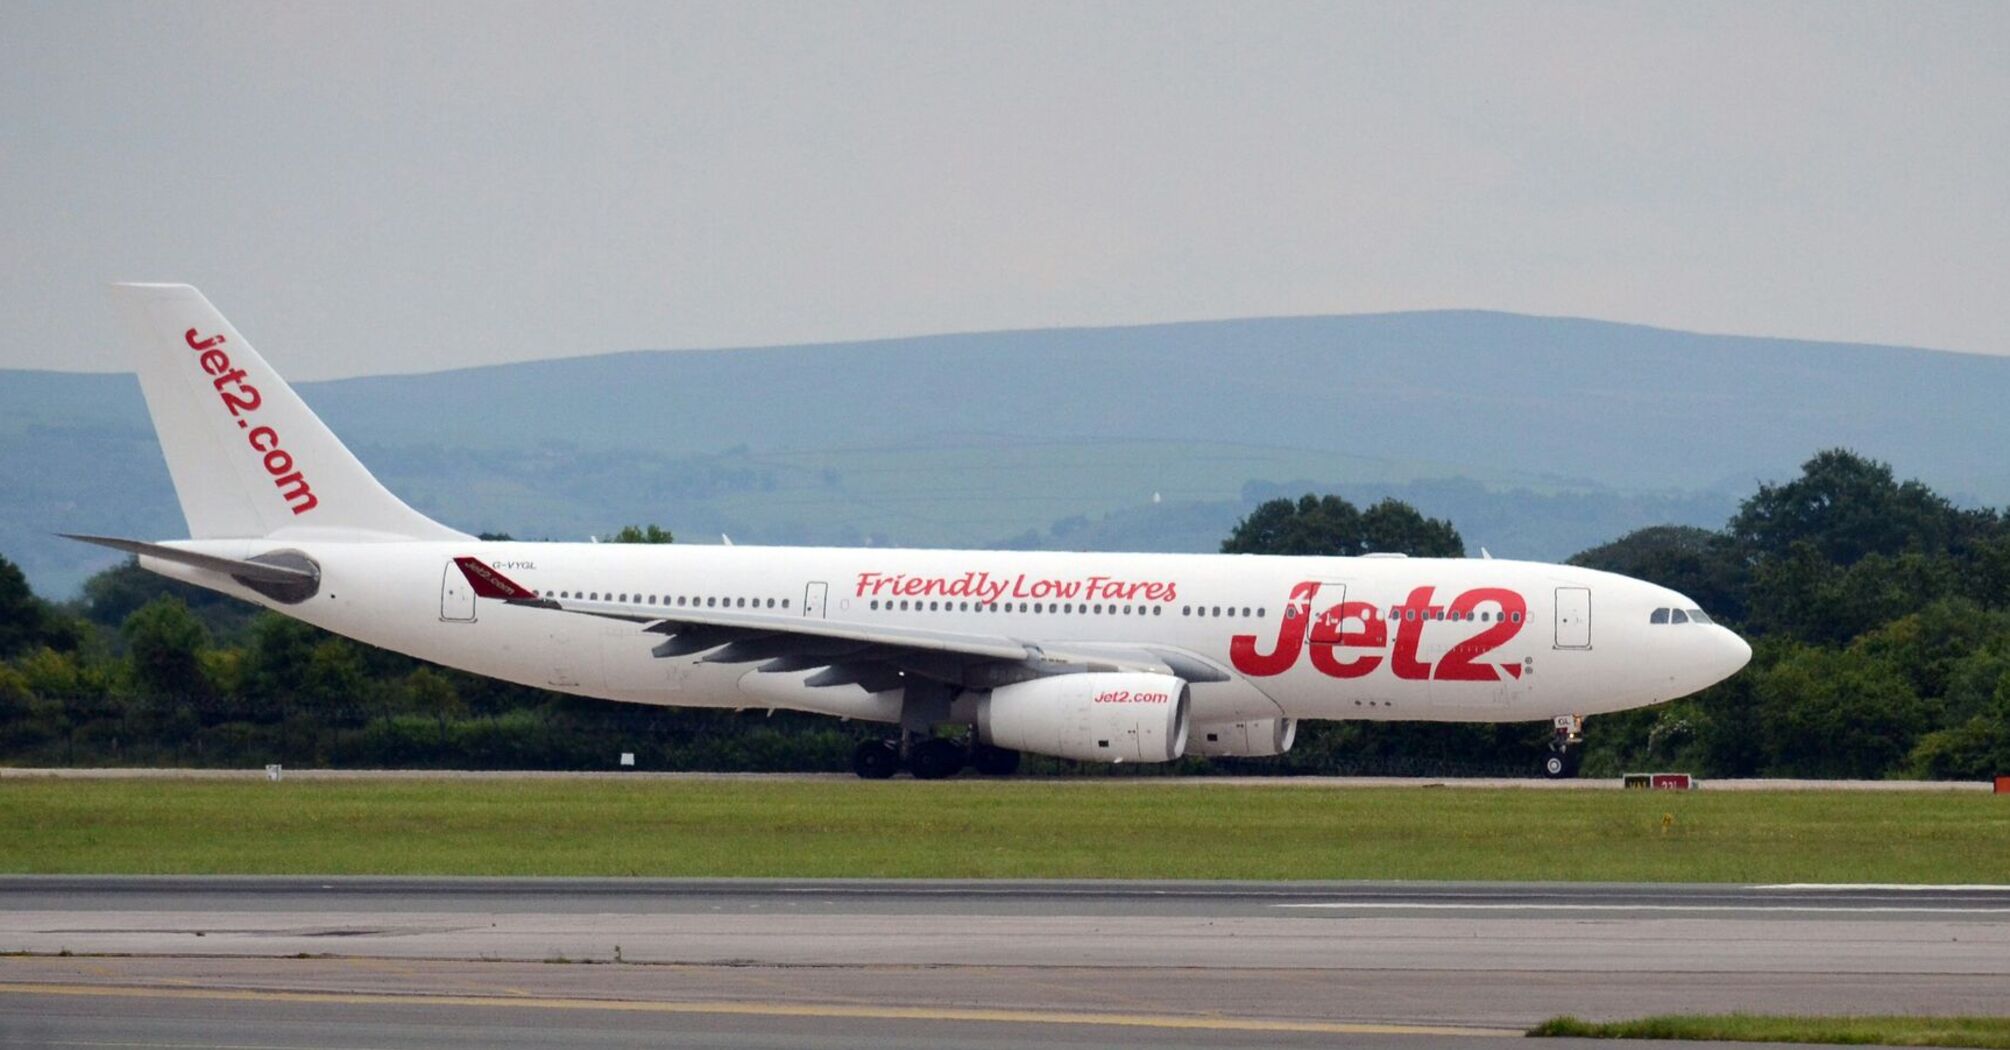 The Jet2 plane made an emergency landing due to reports of smoke